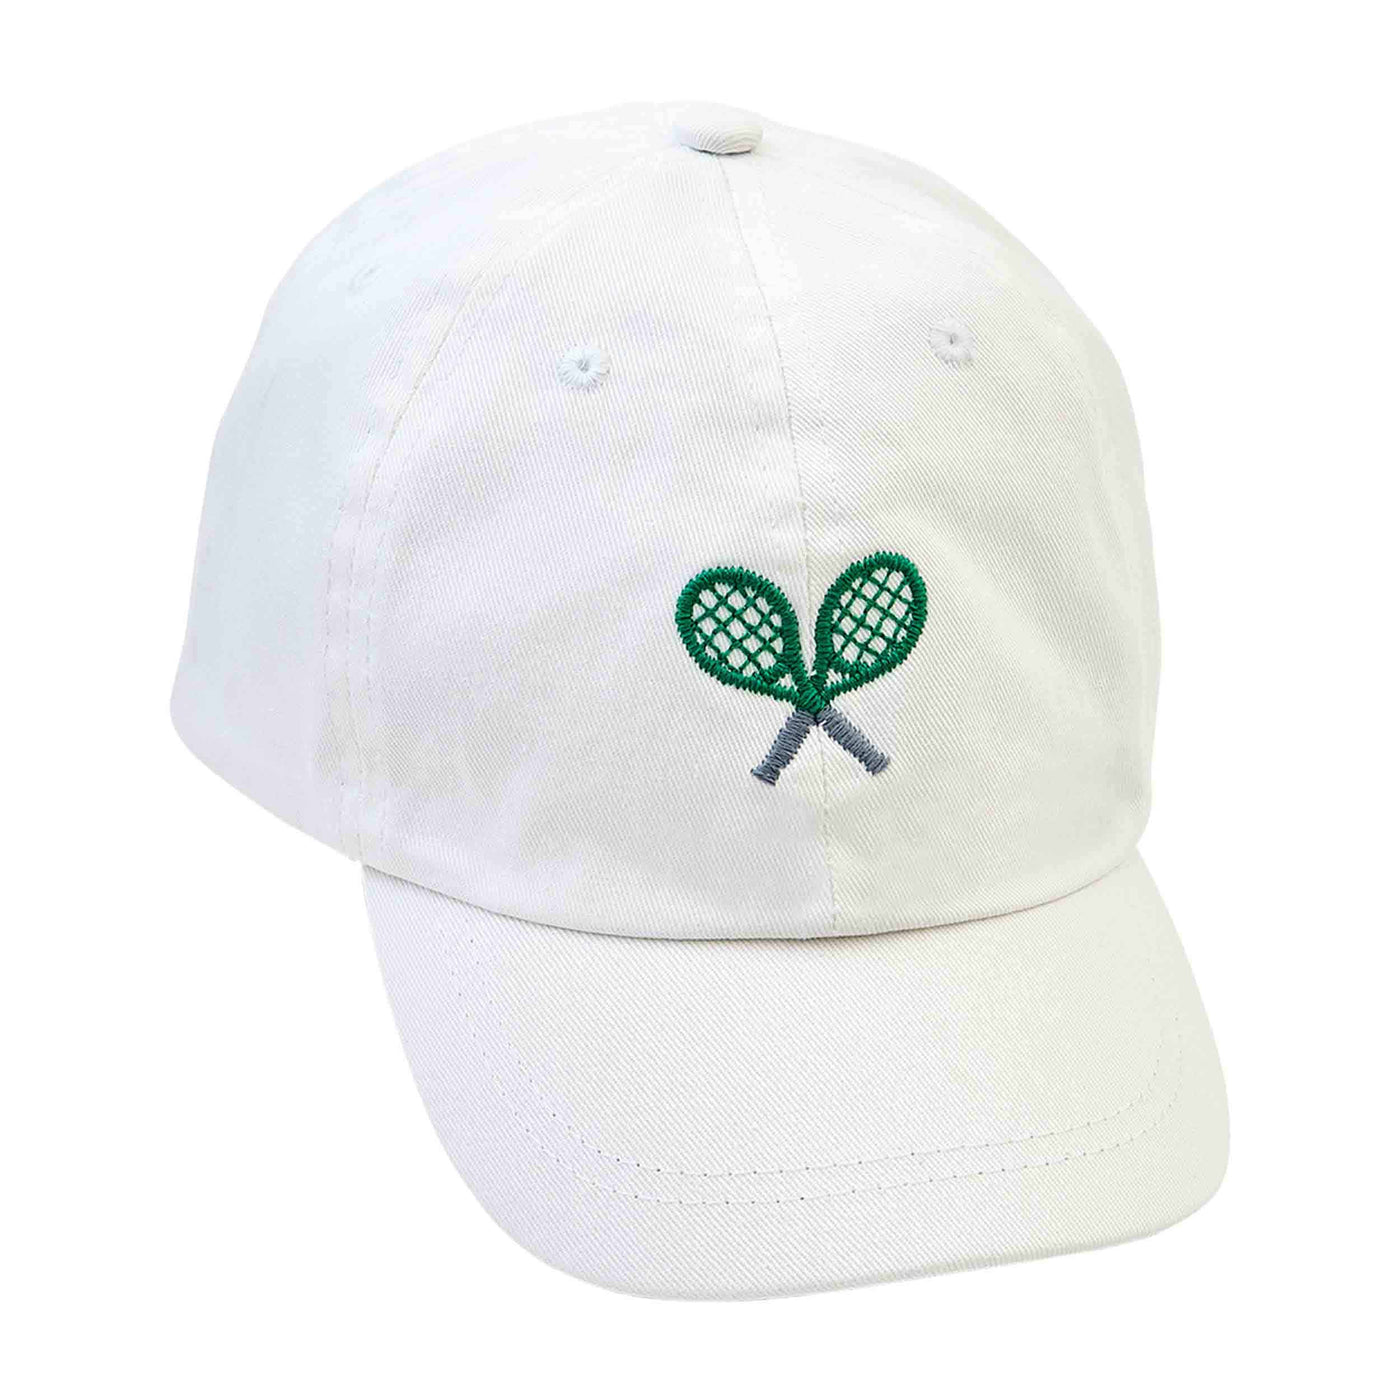 Tennis Embroidered Toddler Hat